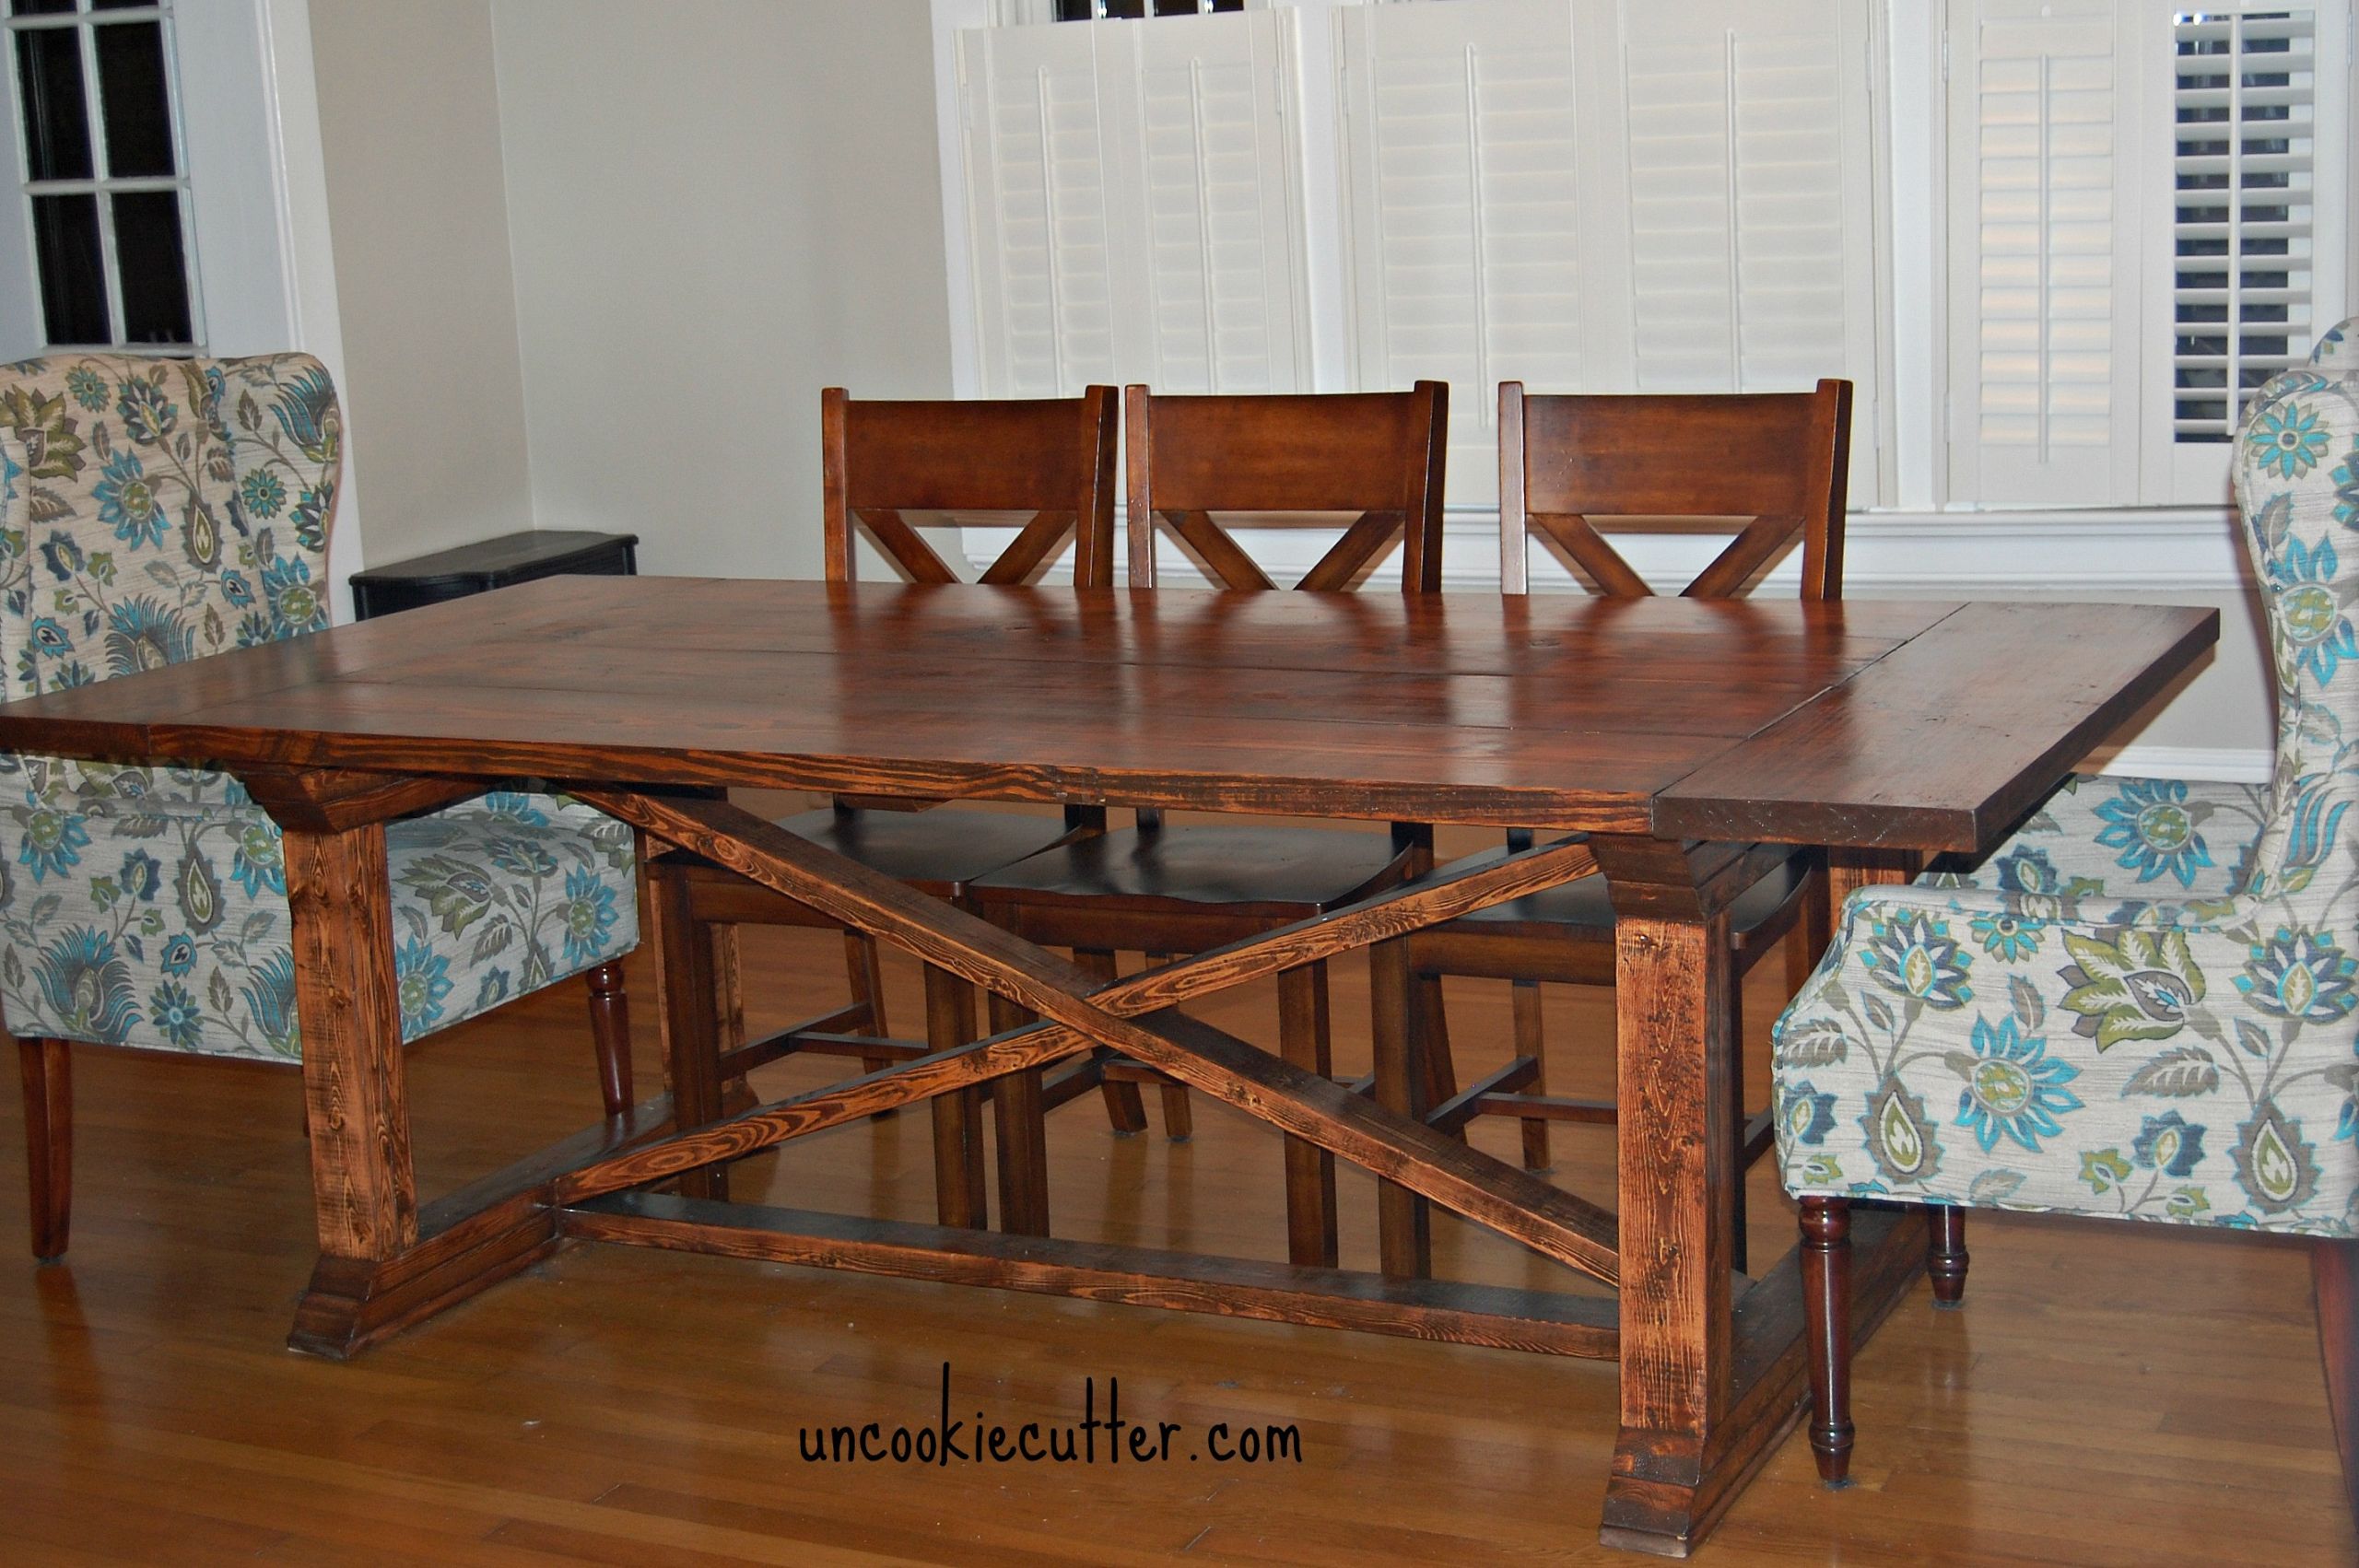 Dining Table DIY Plans
 DIY Table with a Removable Top